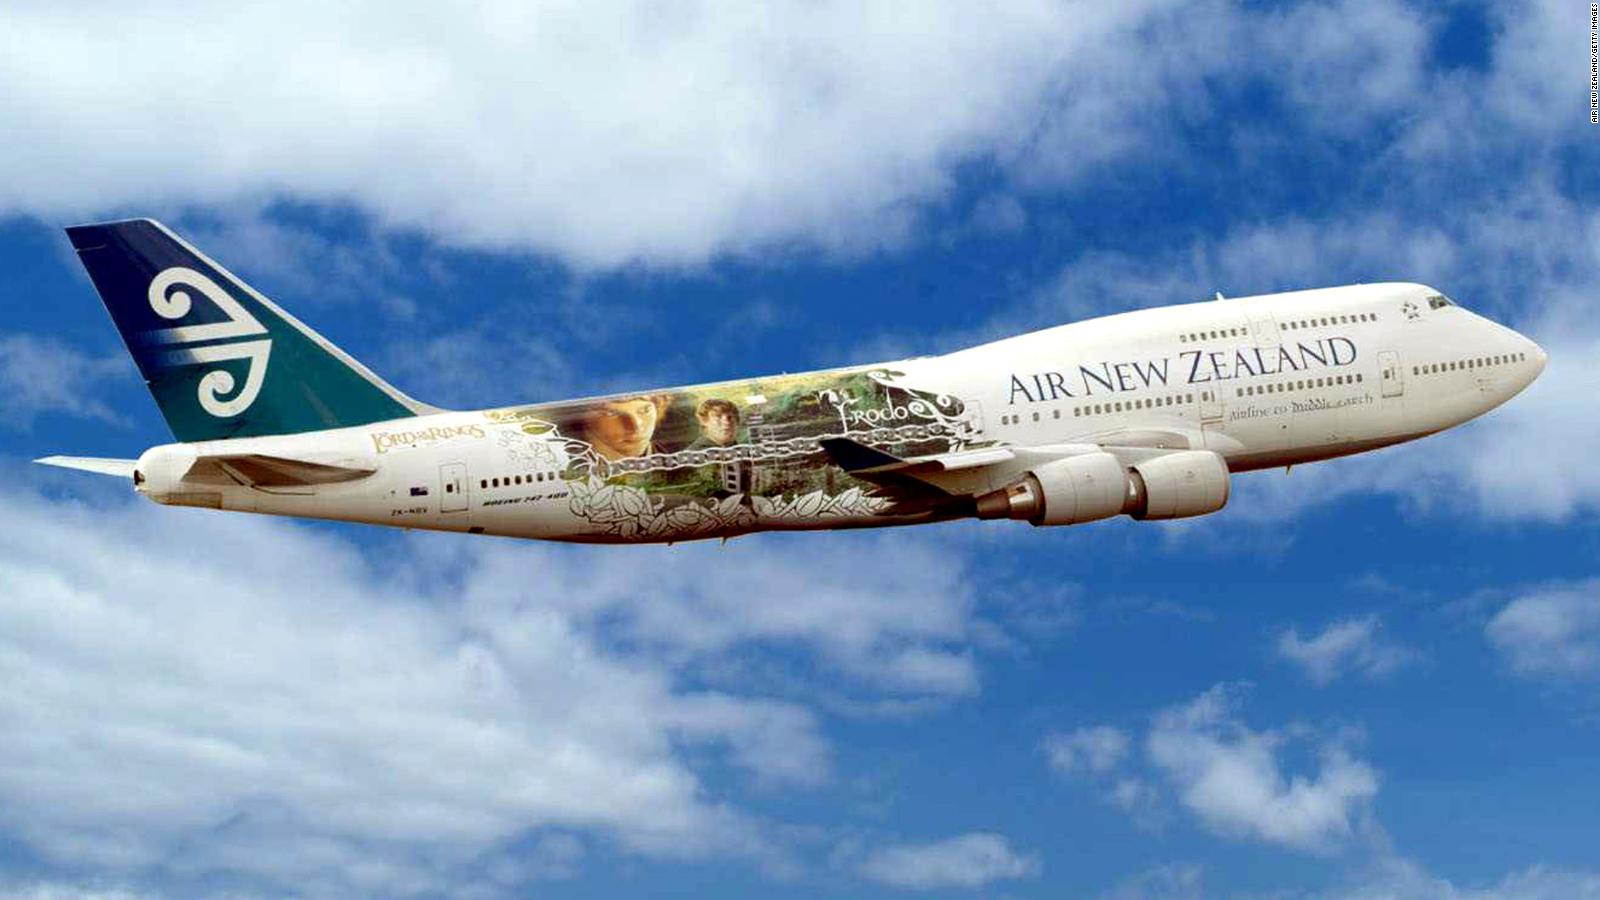 of the coolest aircraft paint schemes you'll ever see